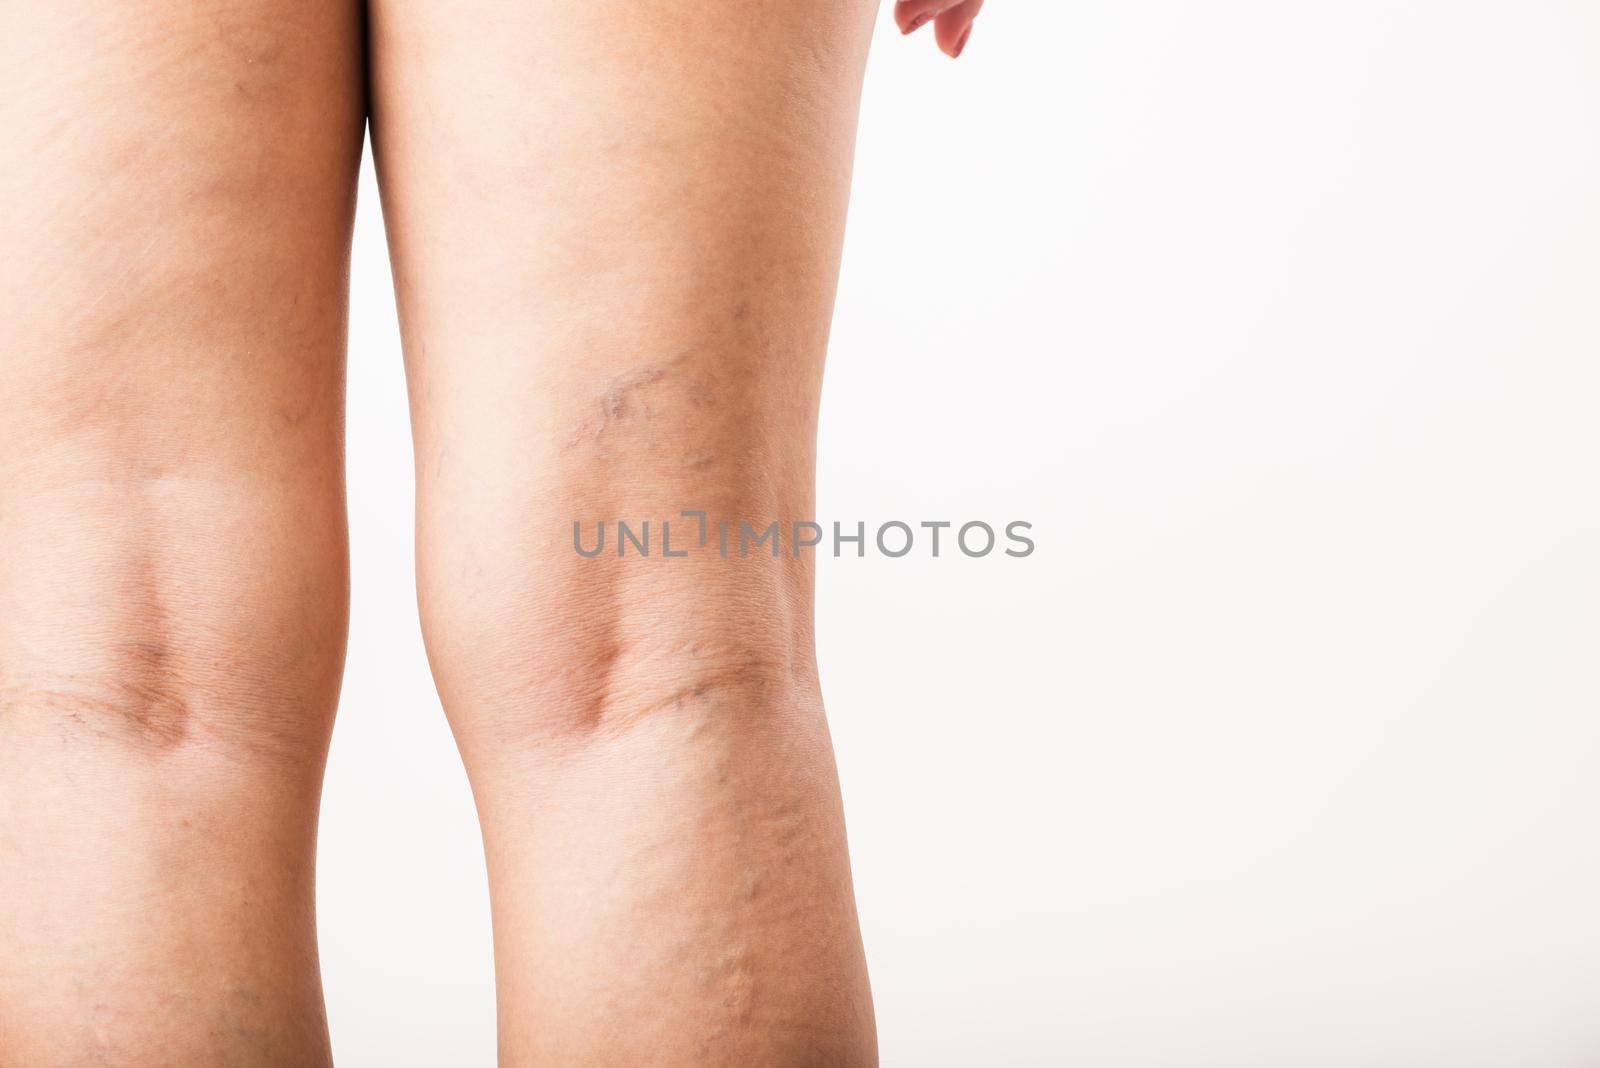 Closeup young Asian woman painful varicose and spider veins on leg, studio shot isolated on white background, Healthcare medical and hygiene skin body varicose veins problems care concept